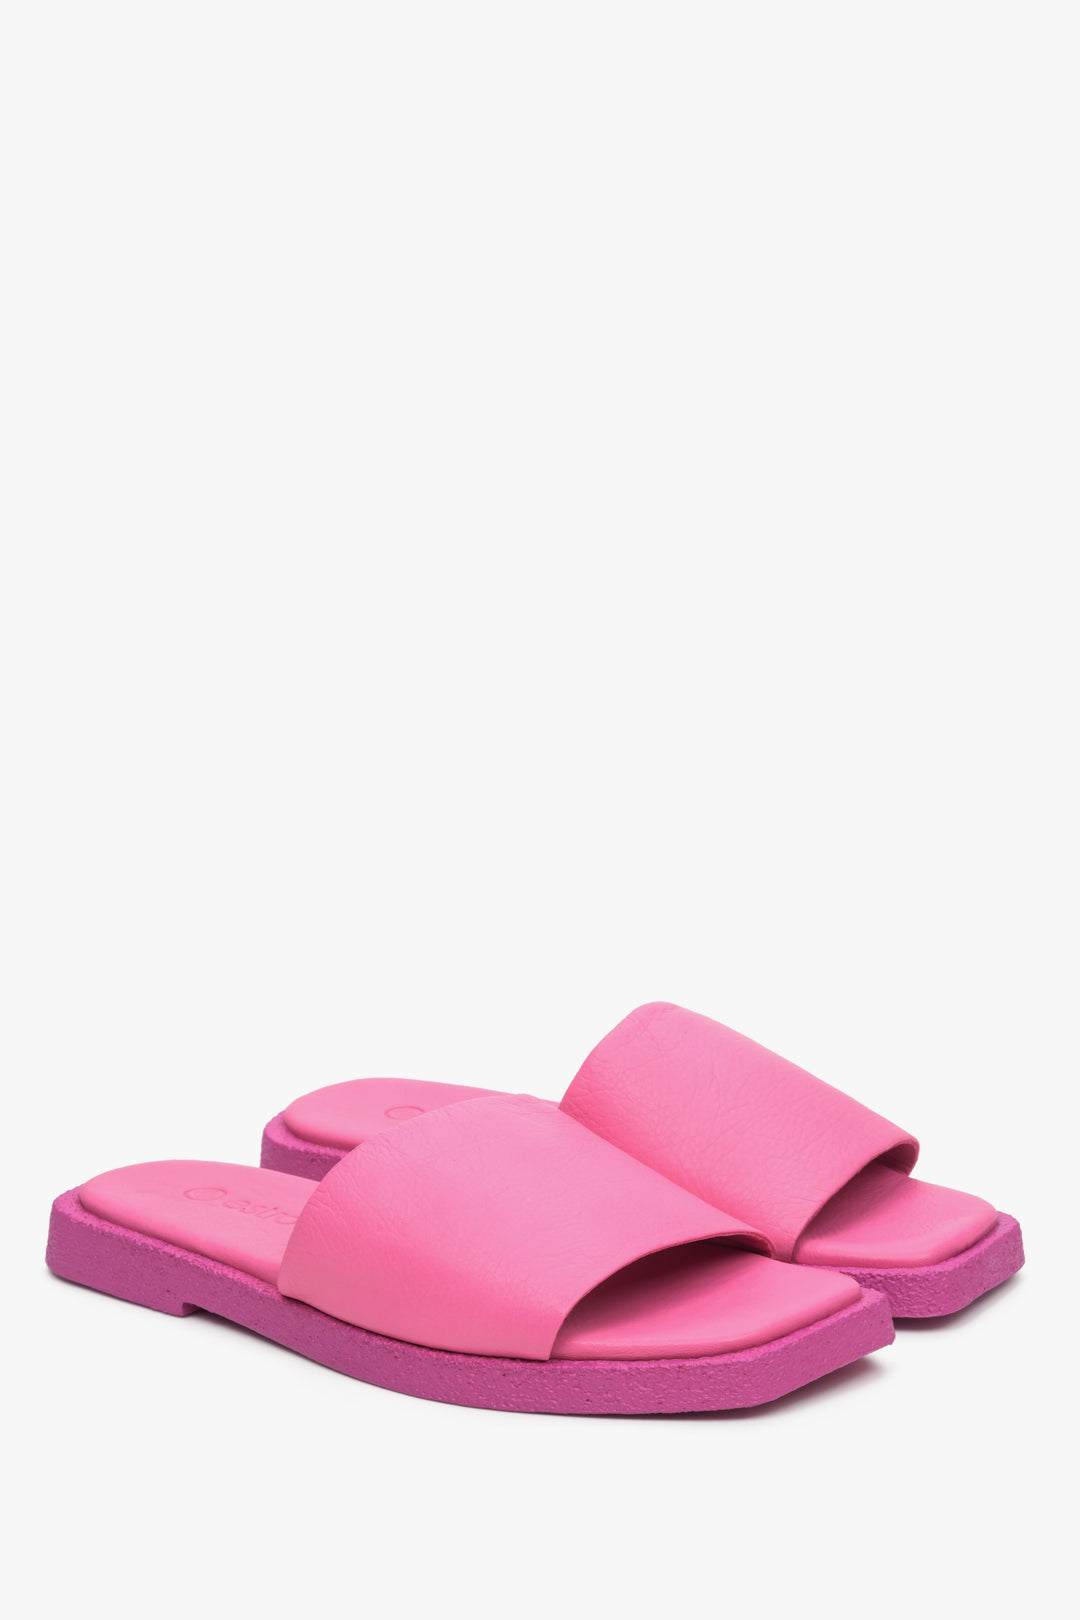 Women's pink slides made of Italian leather - presentation of the top and side seam of the shoes.